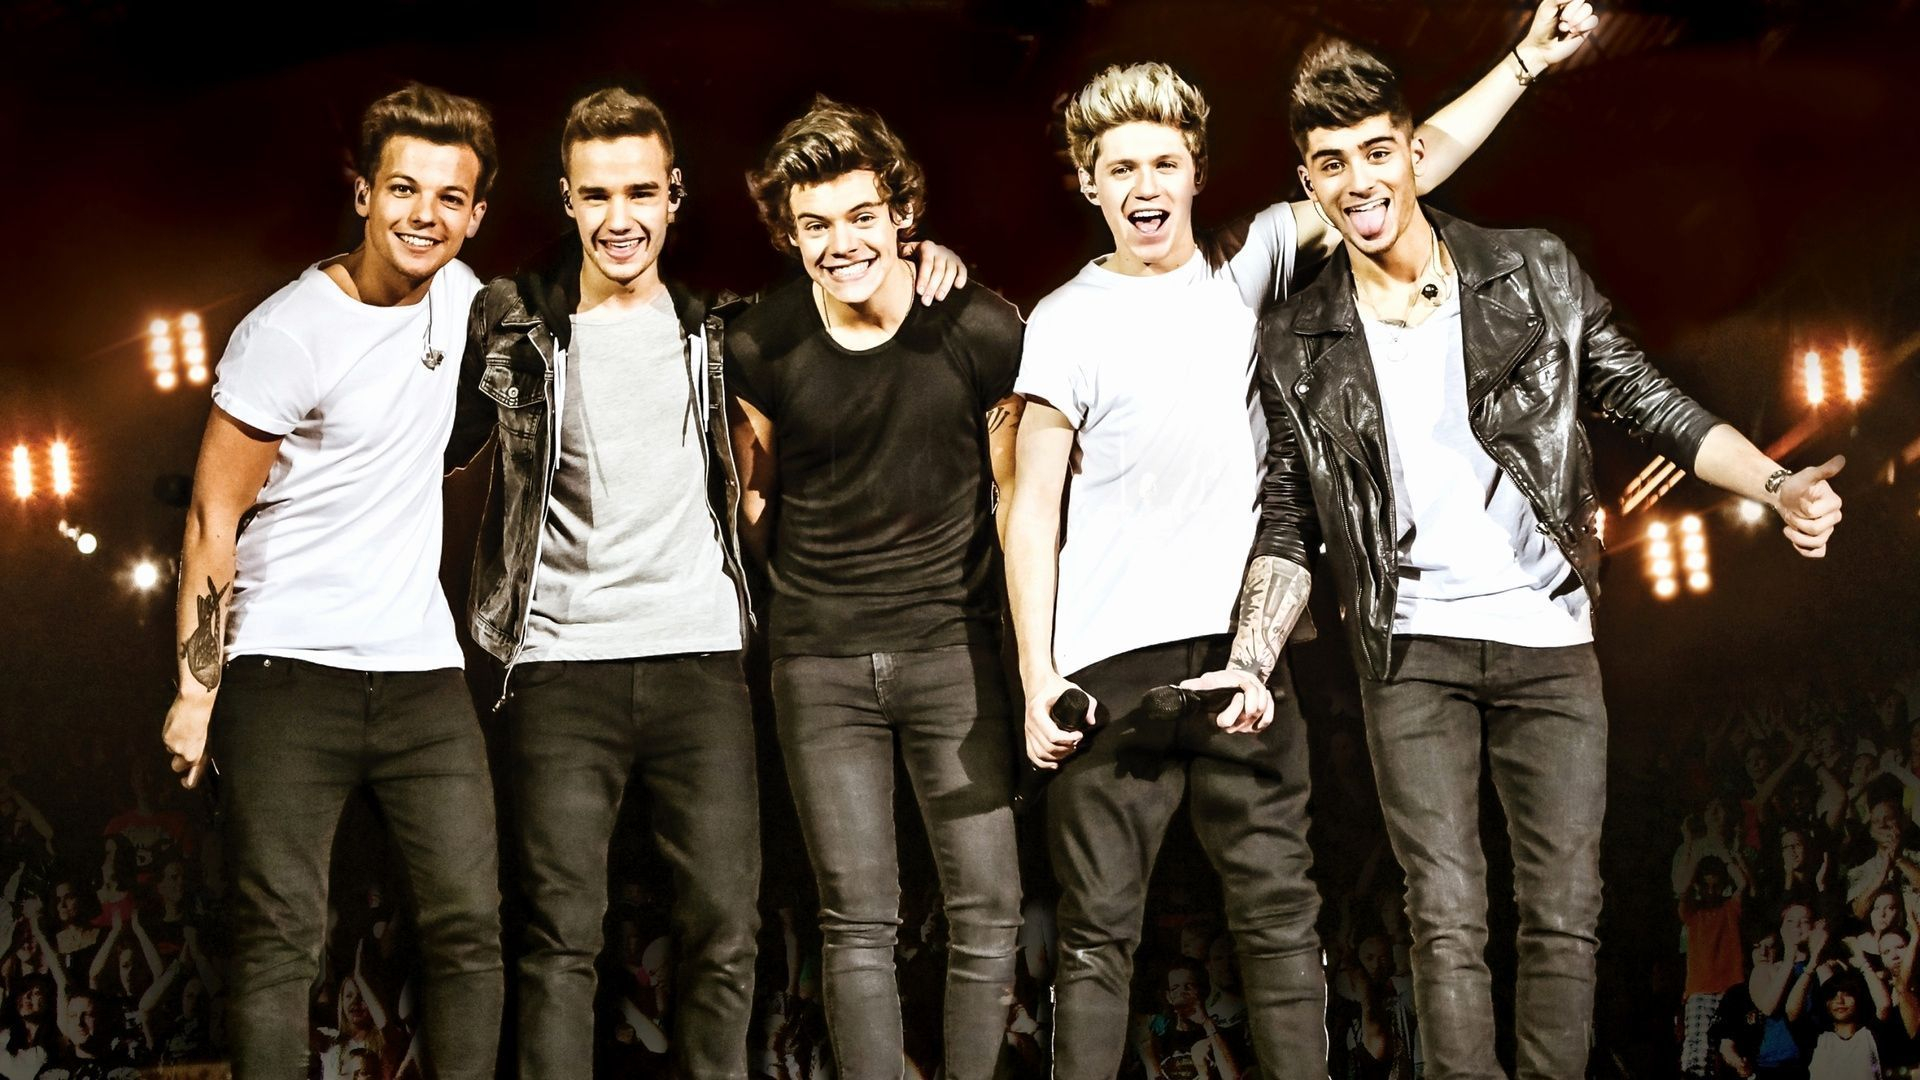 1920x1080 One Direction Concert Wallpapers Top Free One Direction Concert Backgrounds